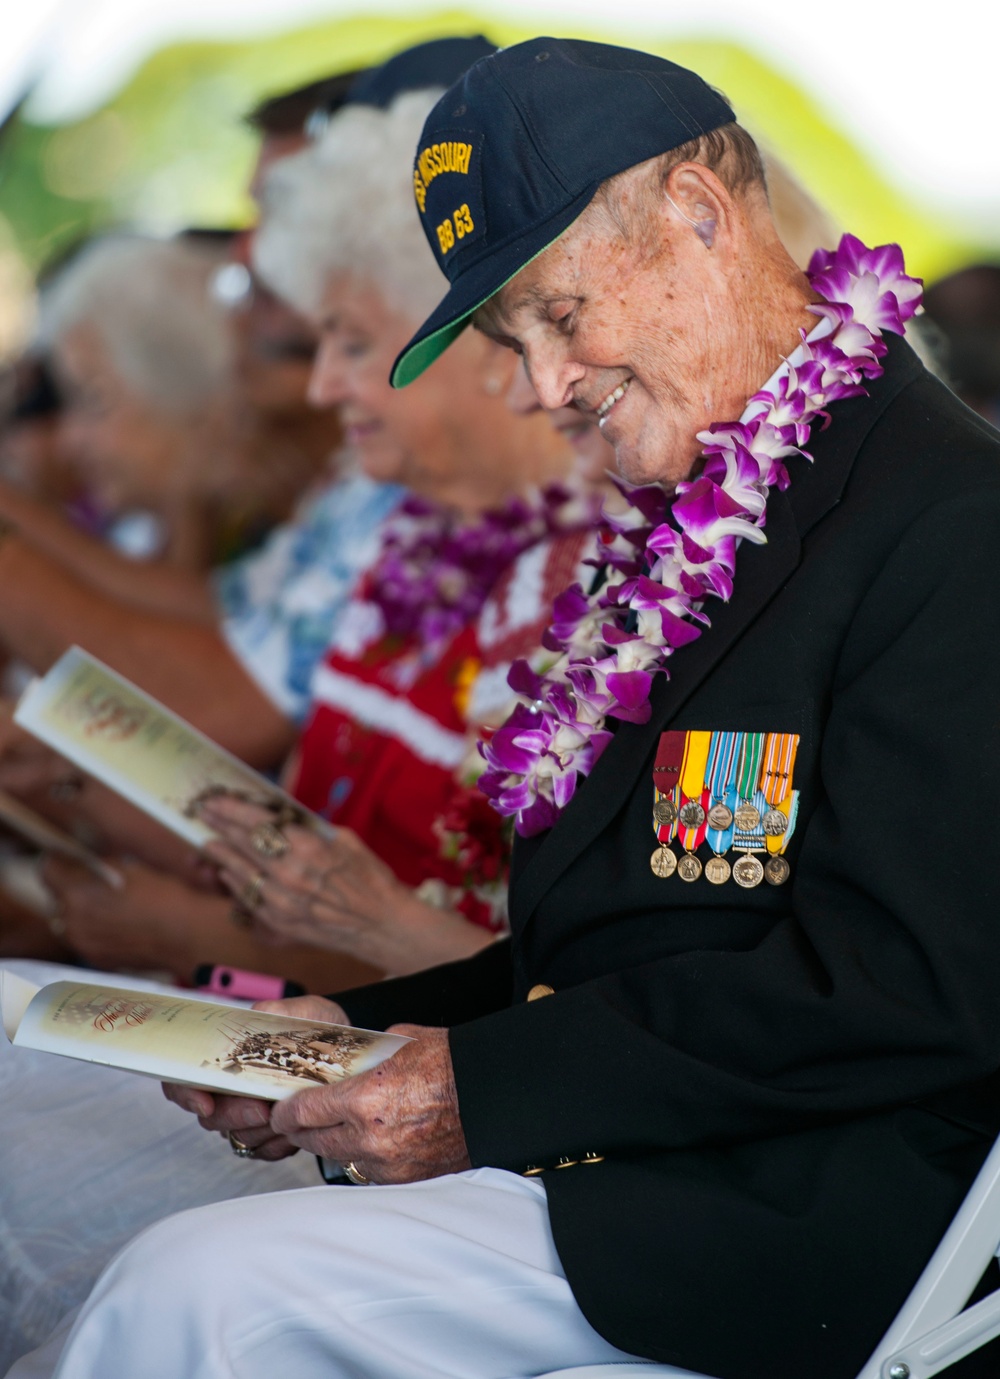 The 69th anniversary of the end of World War II aboard the Battleship Missouri Memorial